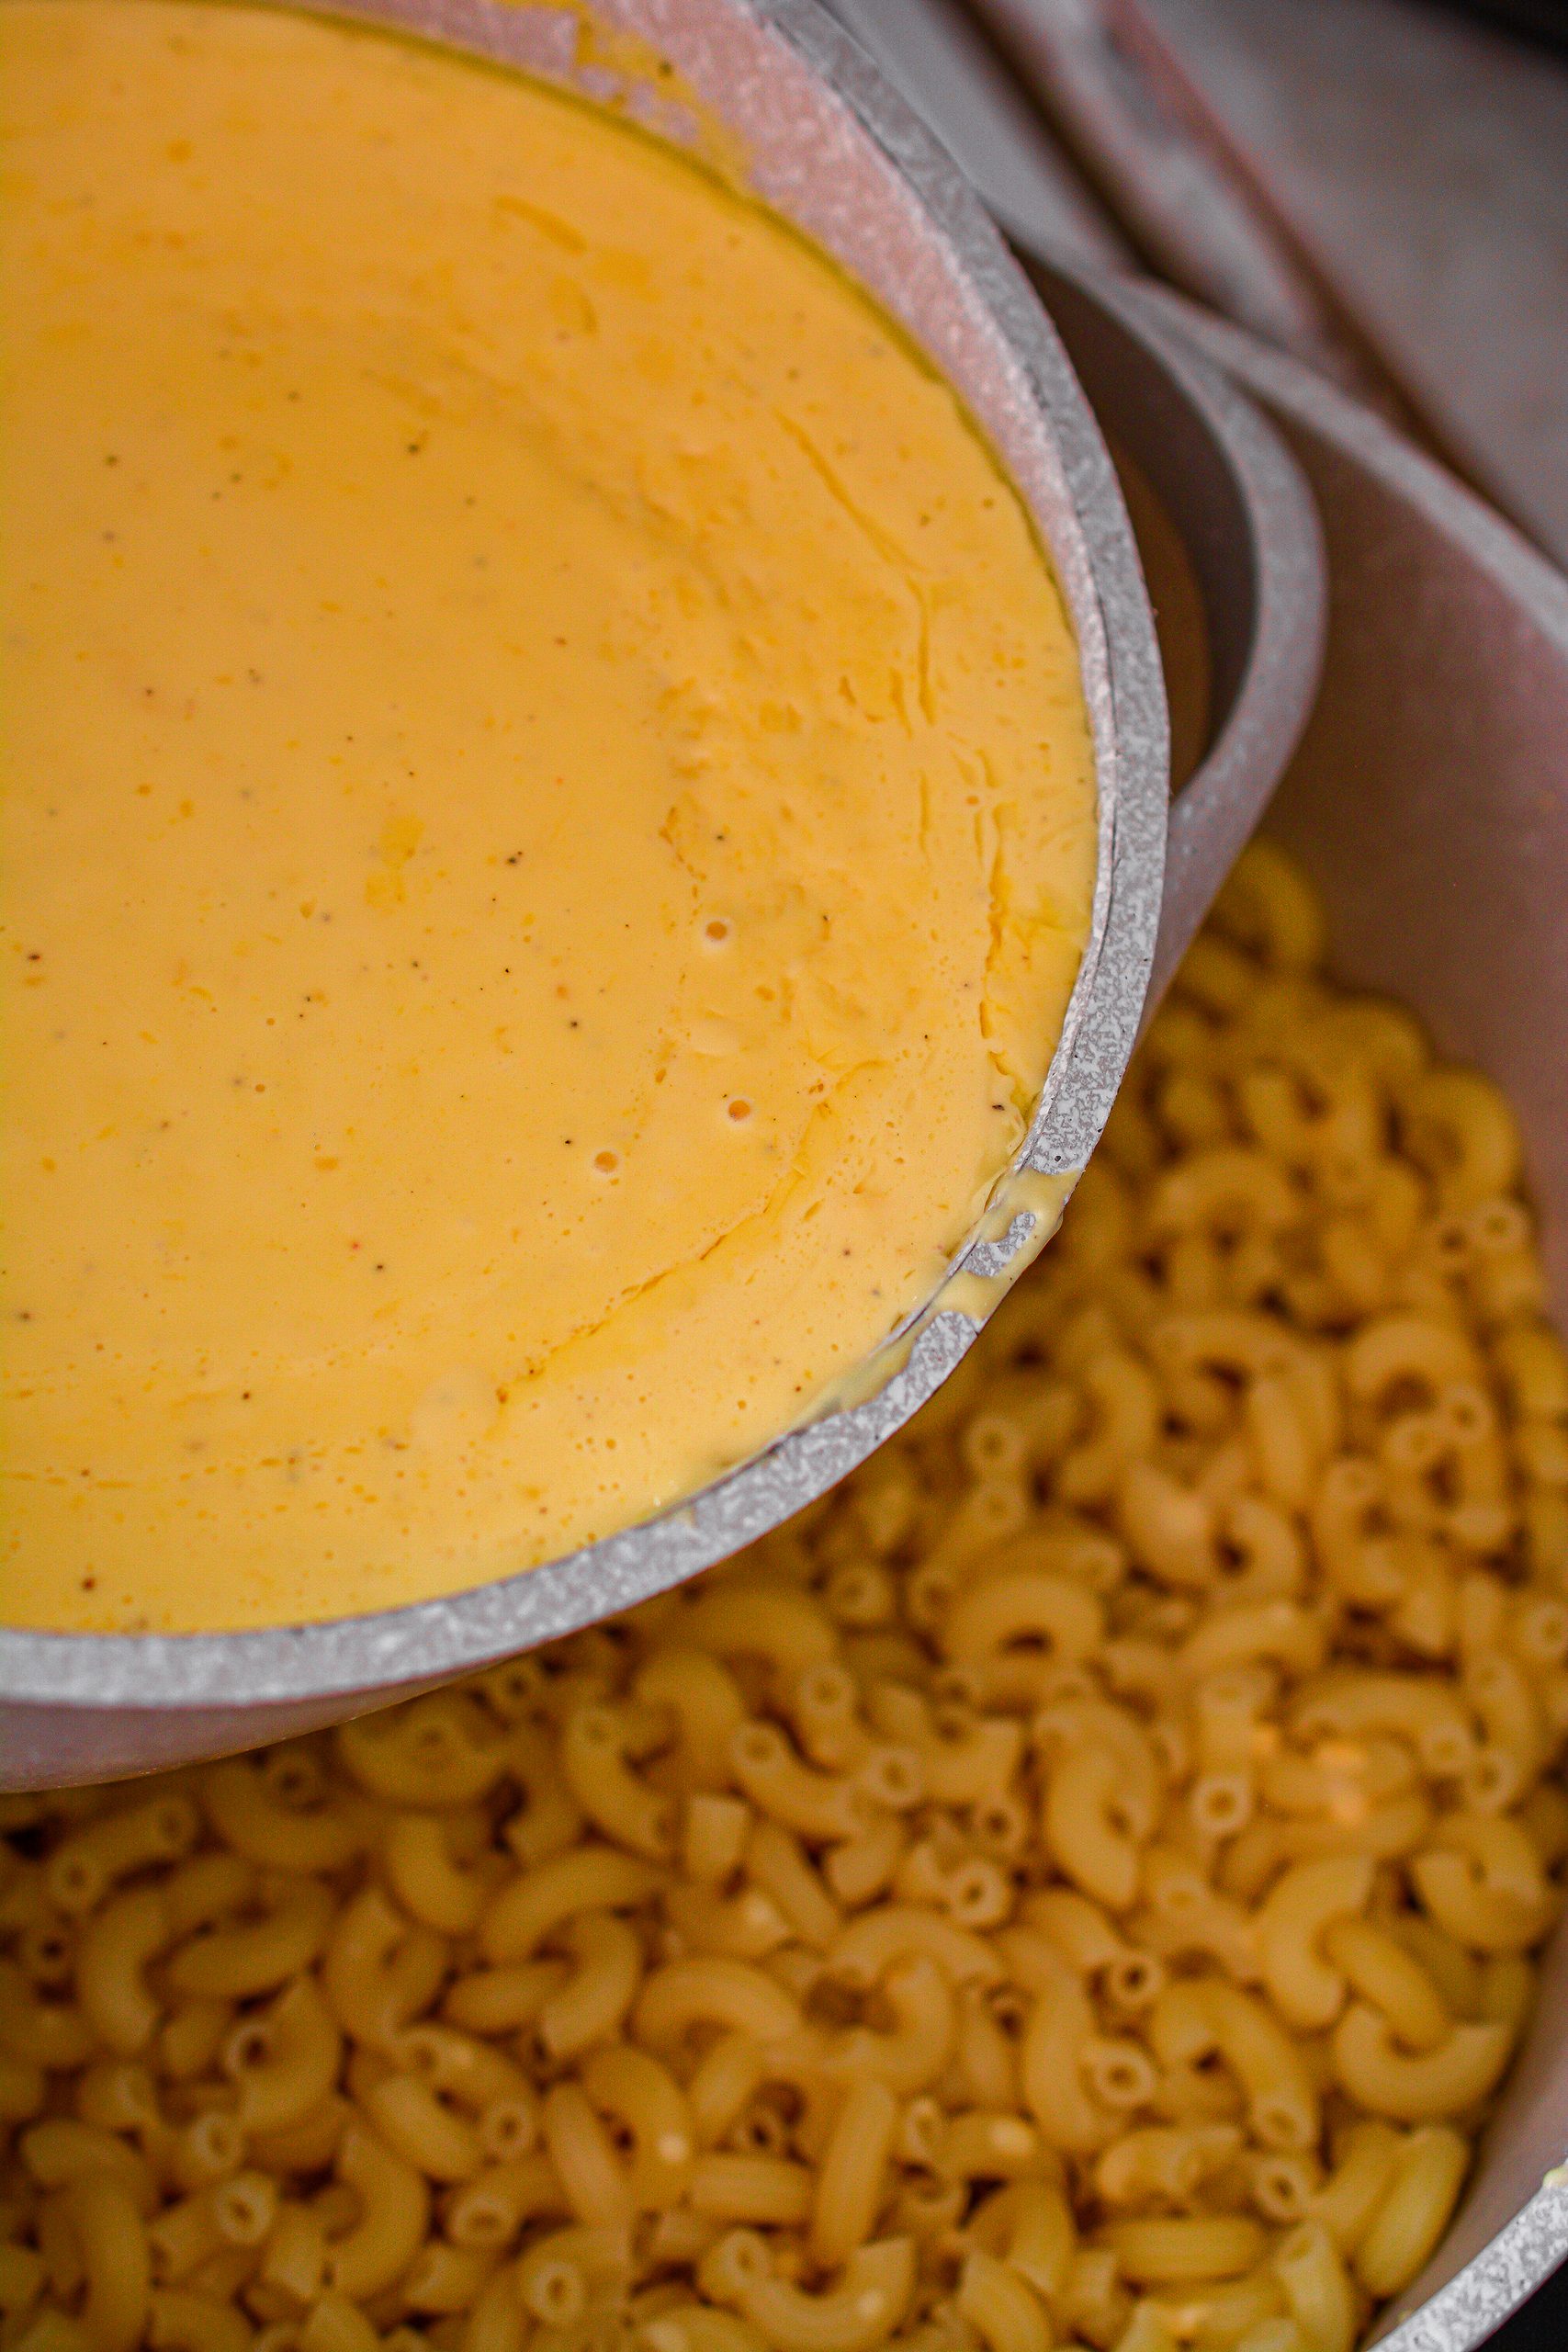 Pour the cheese mixture over the macaroni in a large saucepan.